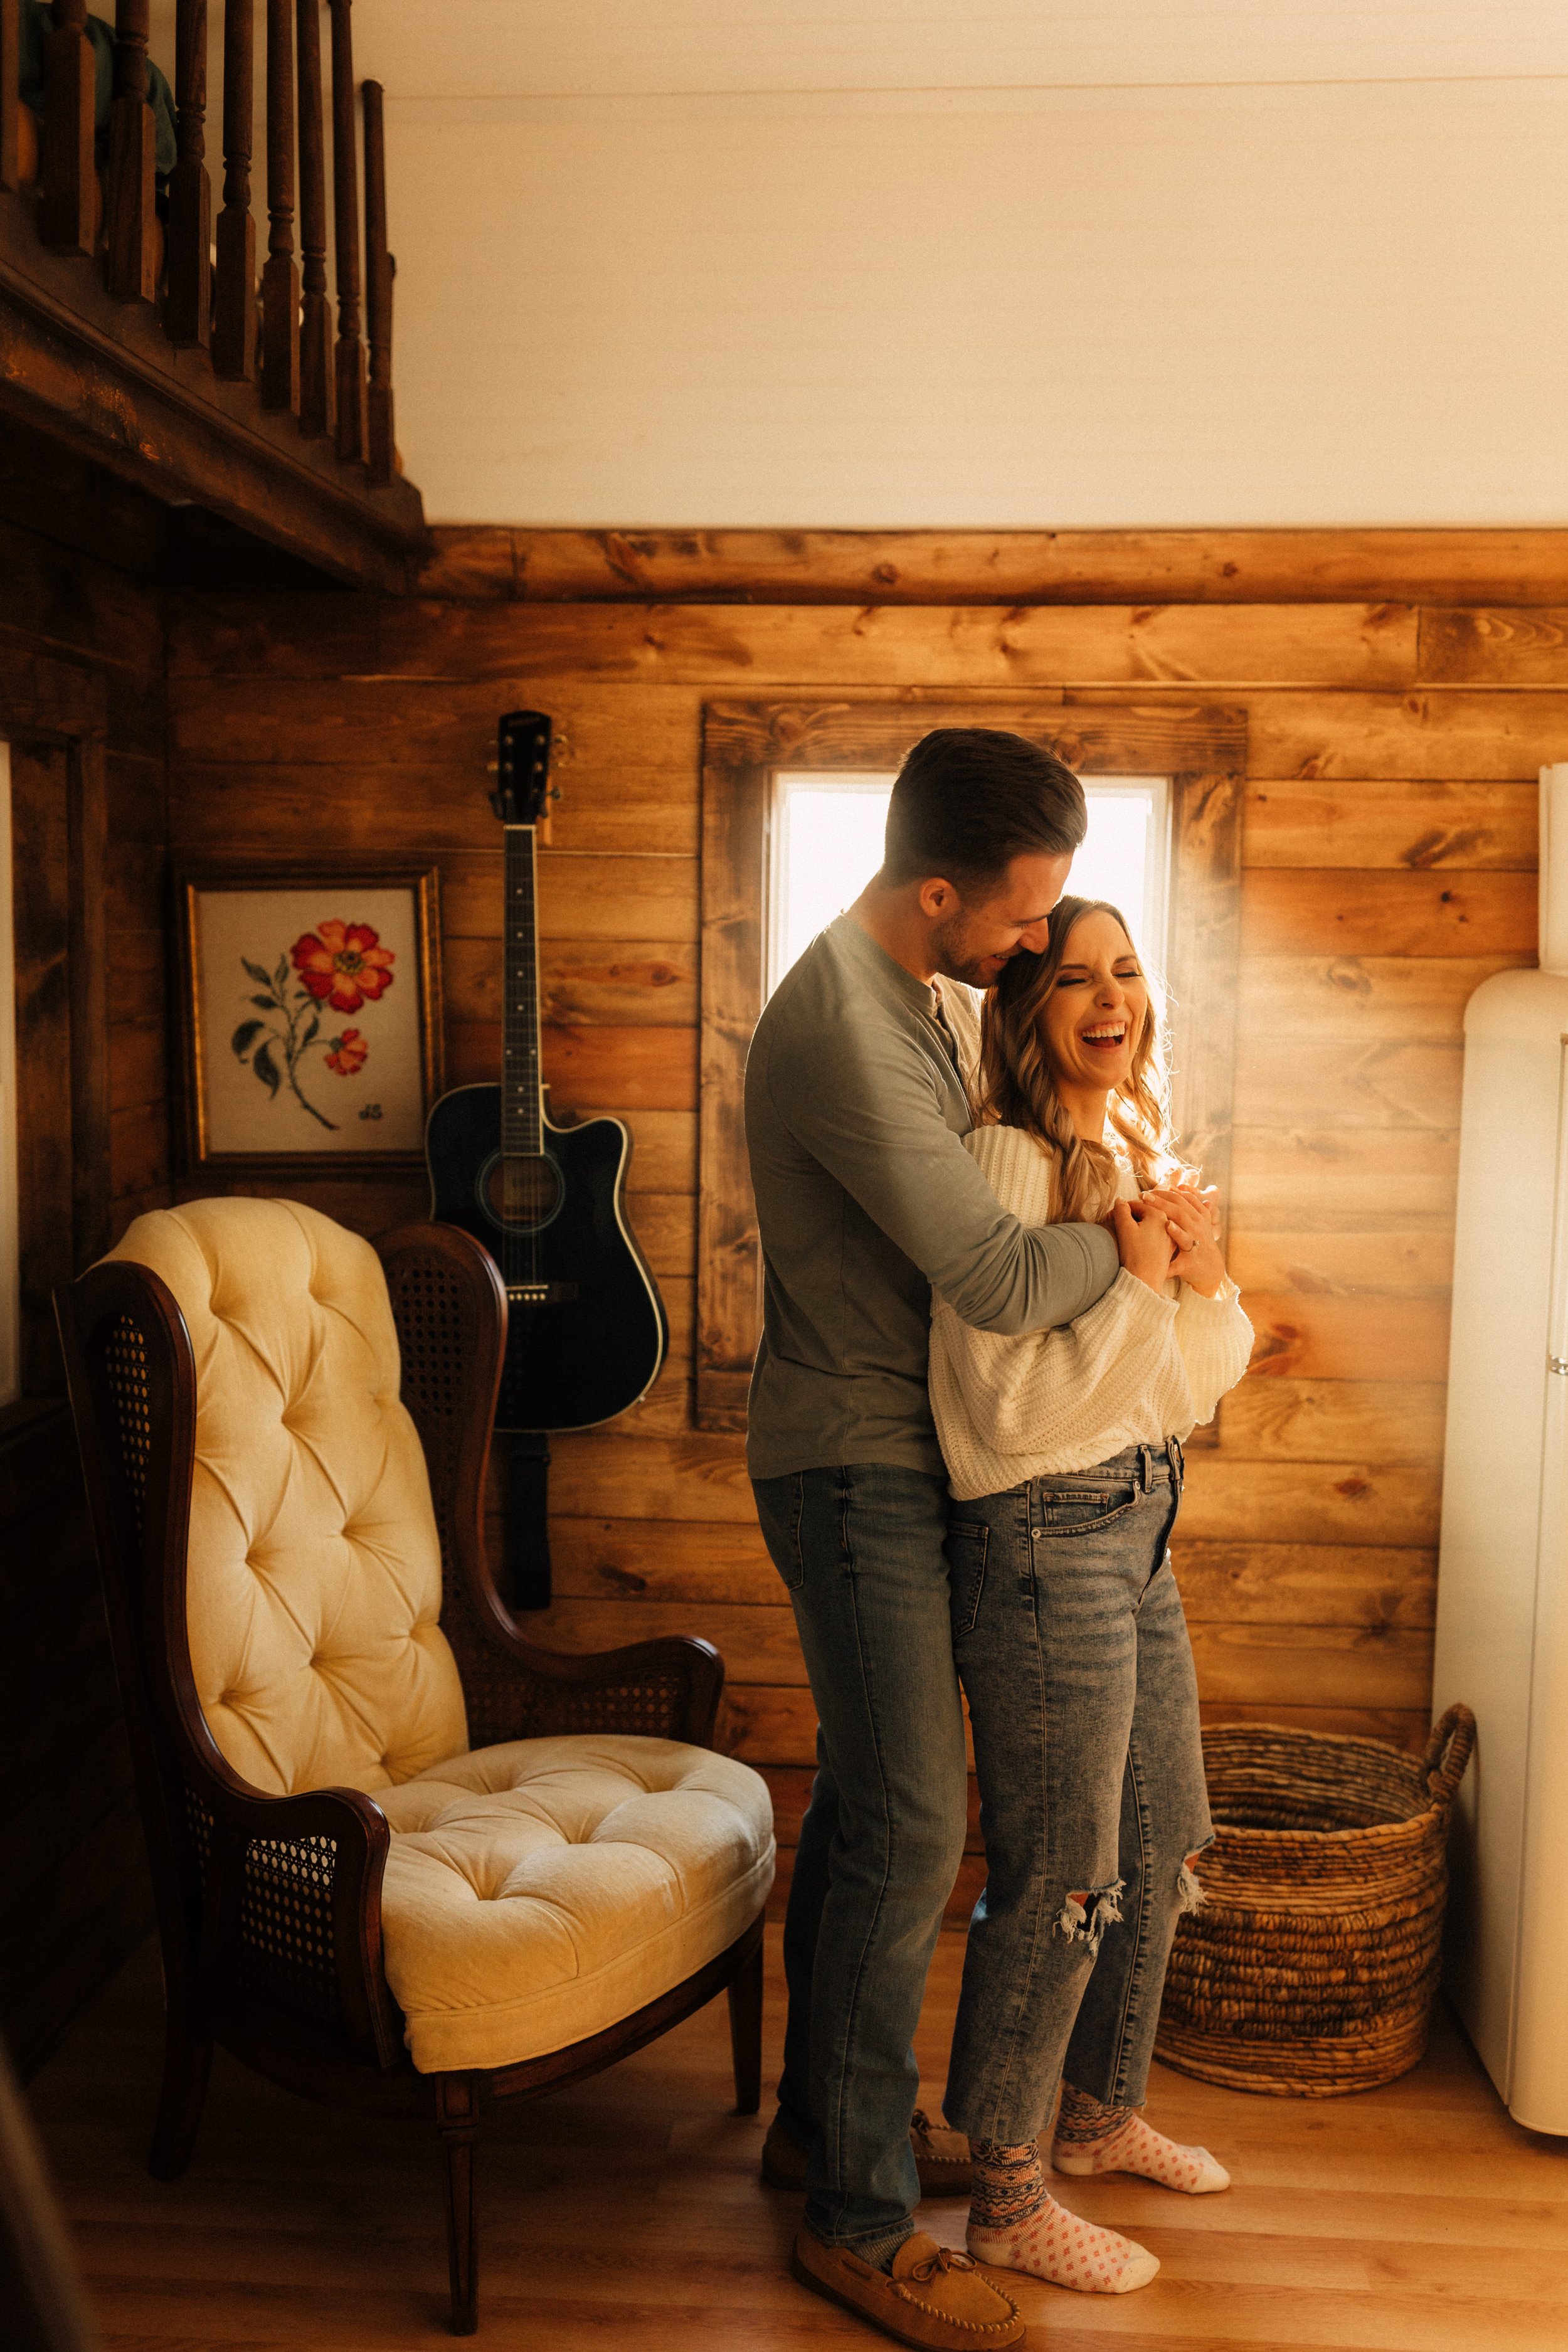 Laura_Ben_Engagment_Session_Winterset_Des_moines_Iowa_Couples_Photographer_Iris_Aisle_Cabin_Conservatory_Candid_Snow_Day_Winter_KMP_Photography-0099.jpg